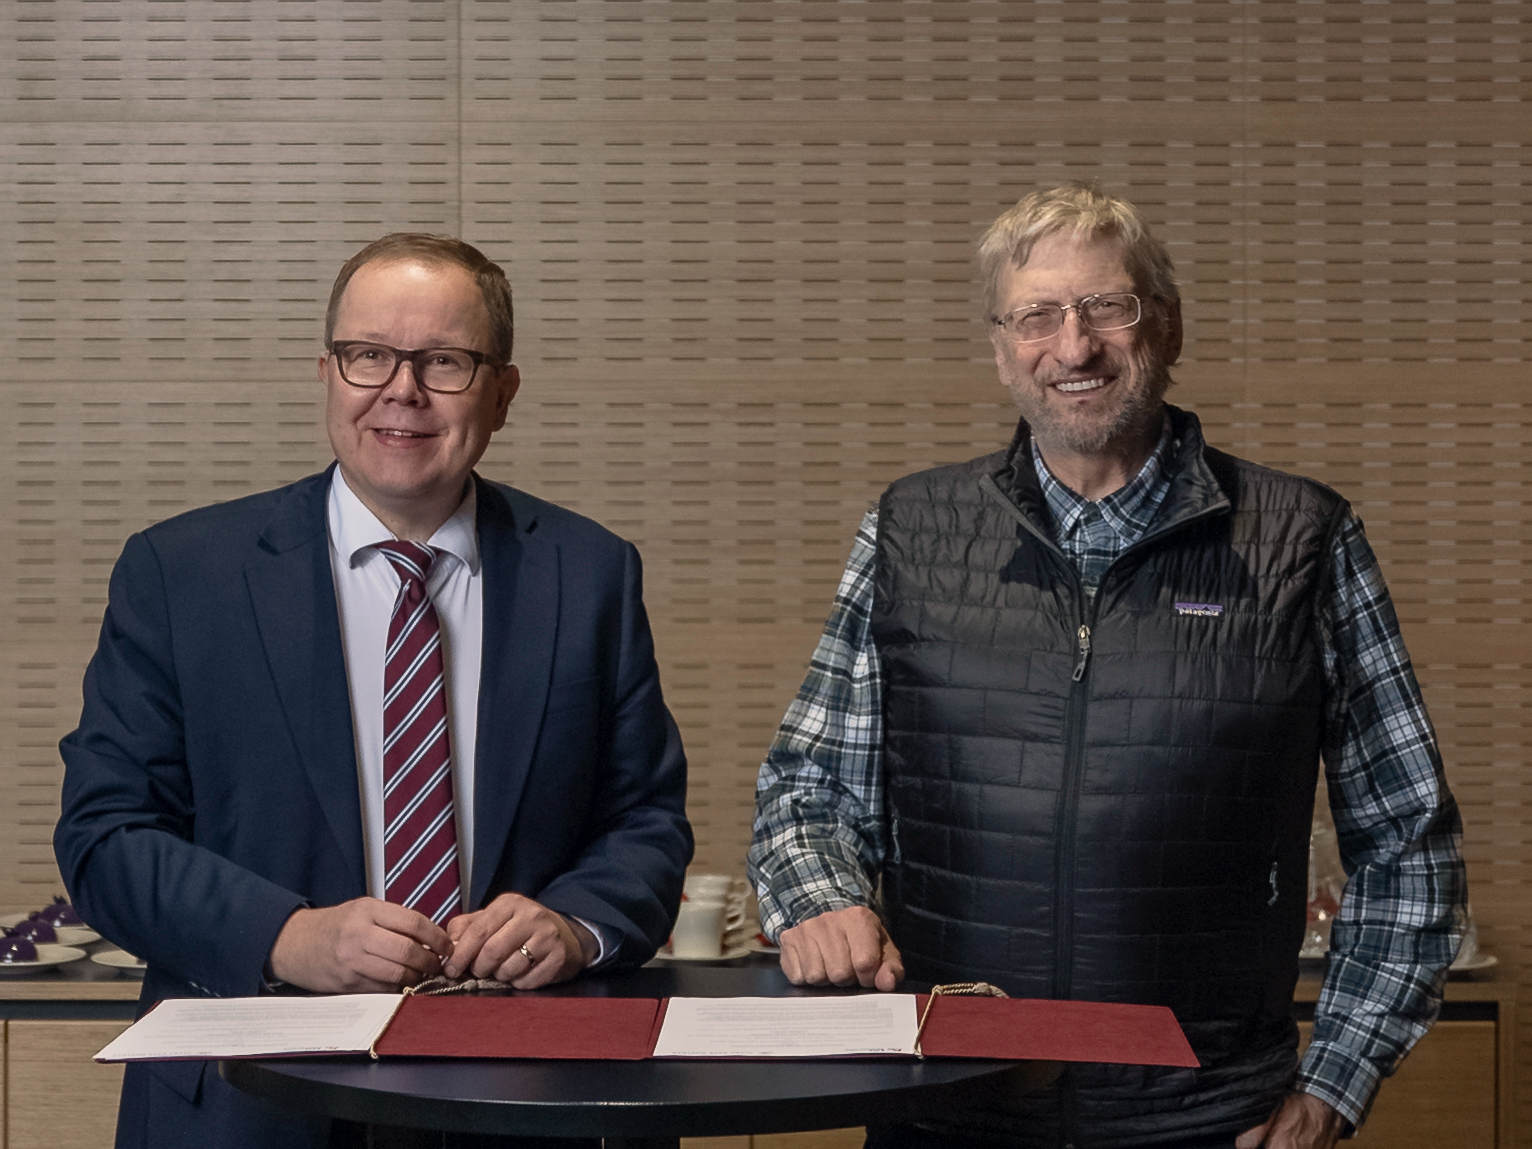 Ultra Safe Nuclear and Lappeenranta University of Technology to explore first advanced research microreactor in Finland